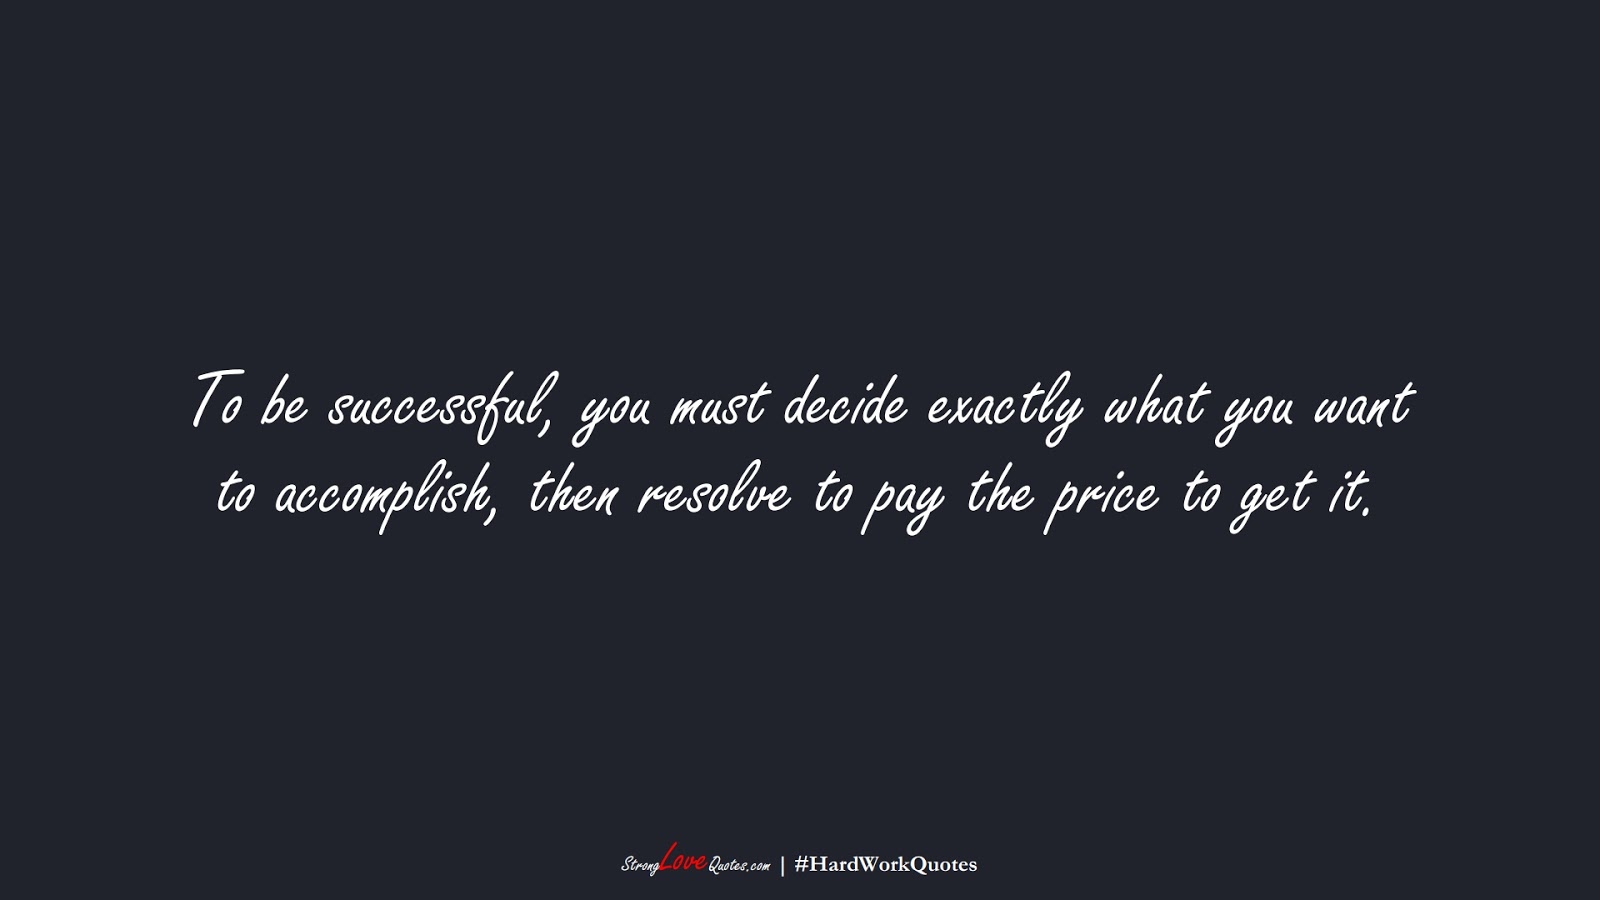 To be successful, you must decide exactly what you want to accomplish, then resolve to pay the price to get it.FALSE